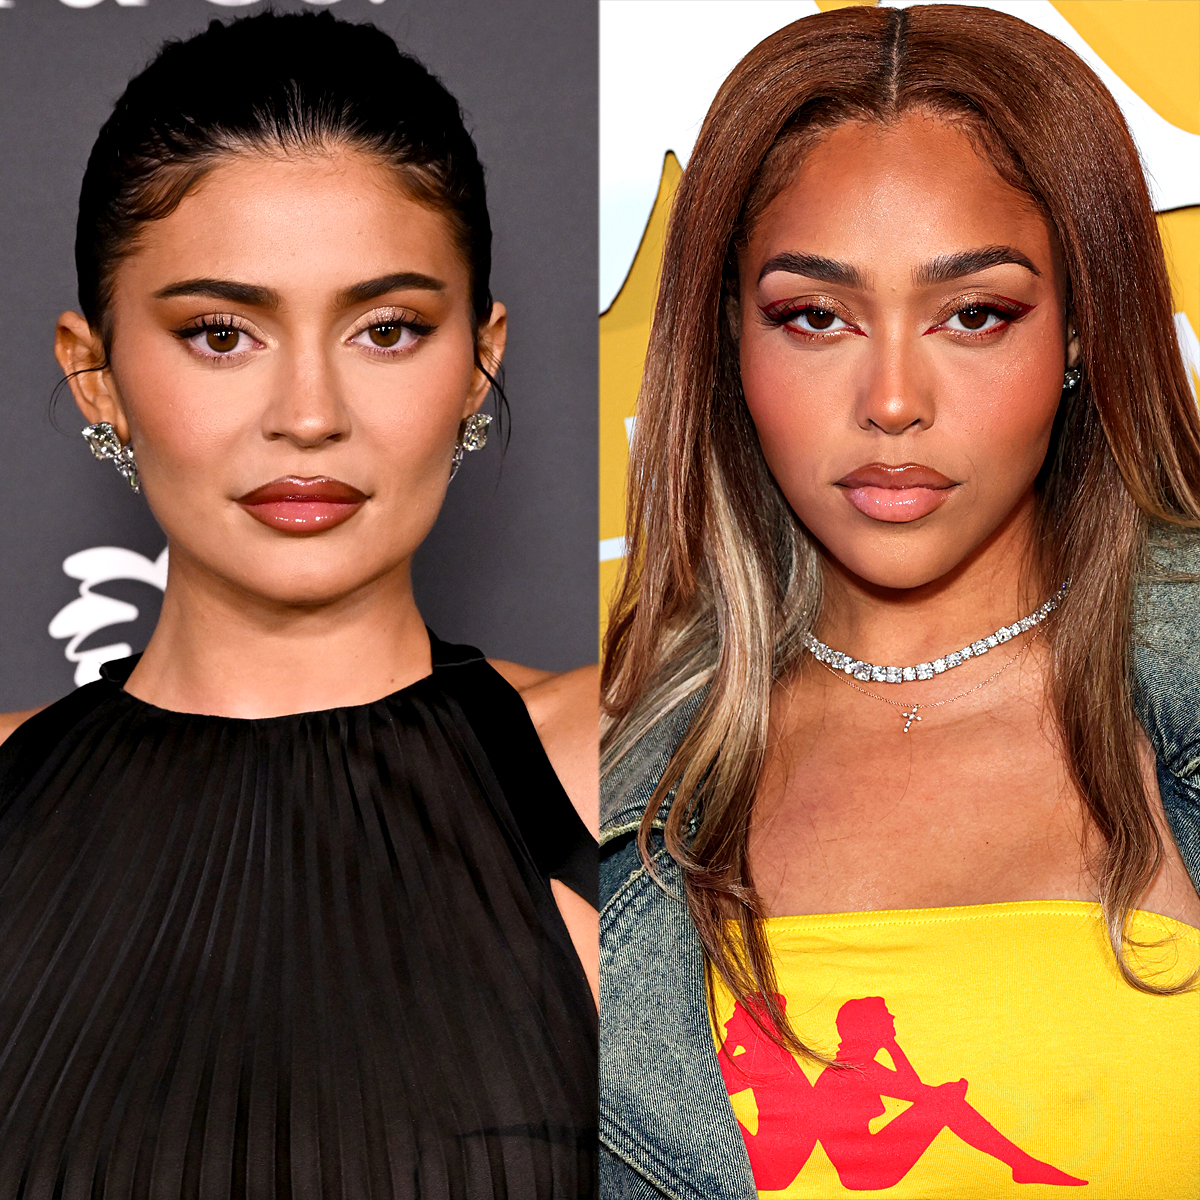 Kylie Jenner finding it 'difficult' to cut off Jordyn Woods after cheating  scandal